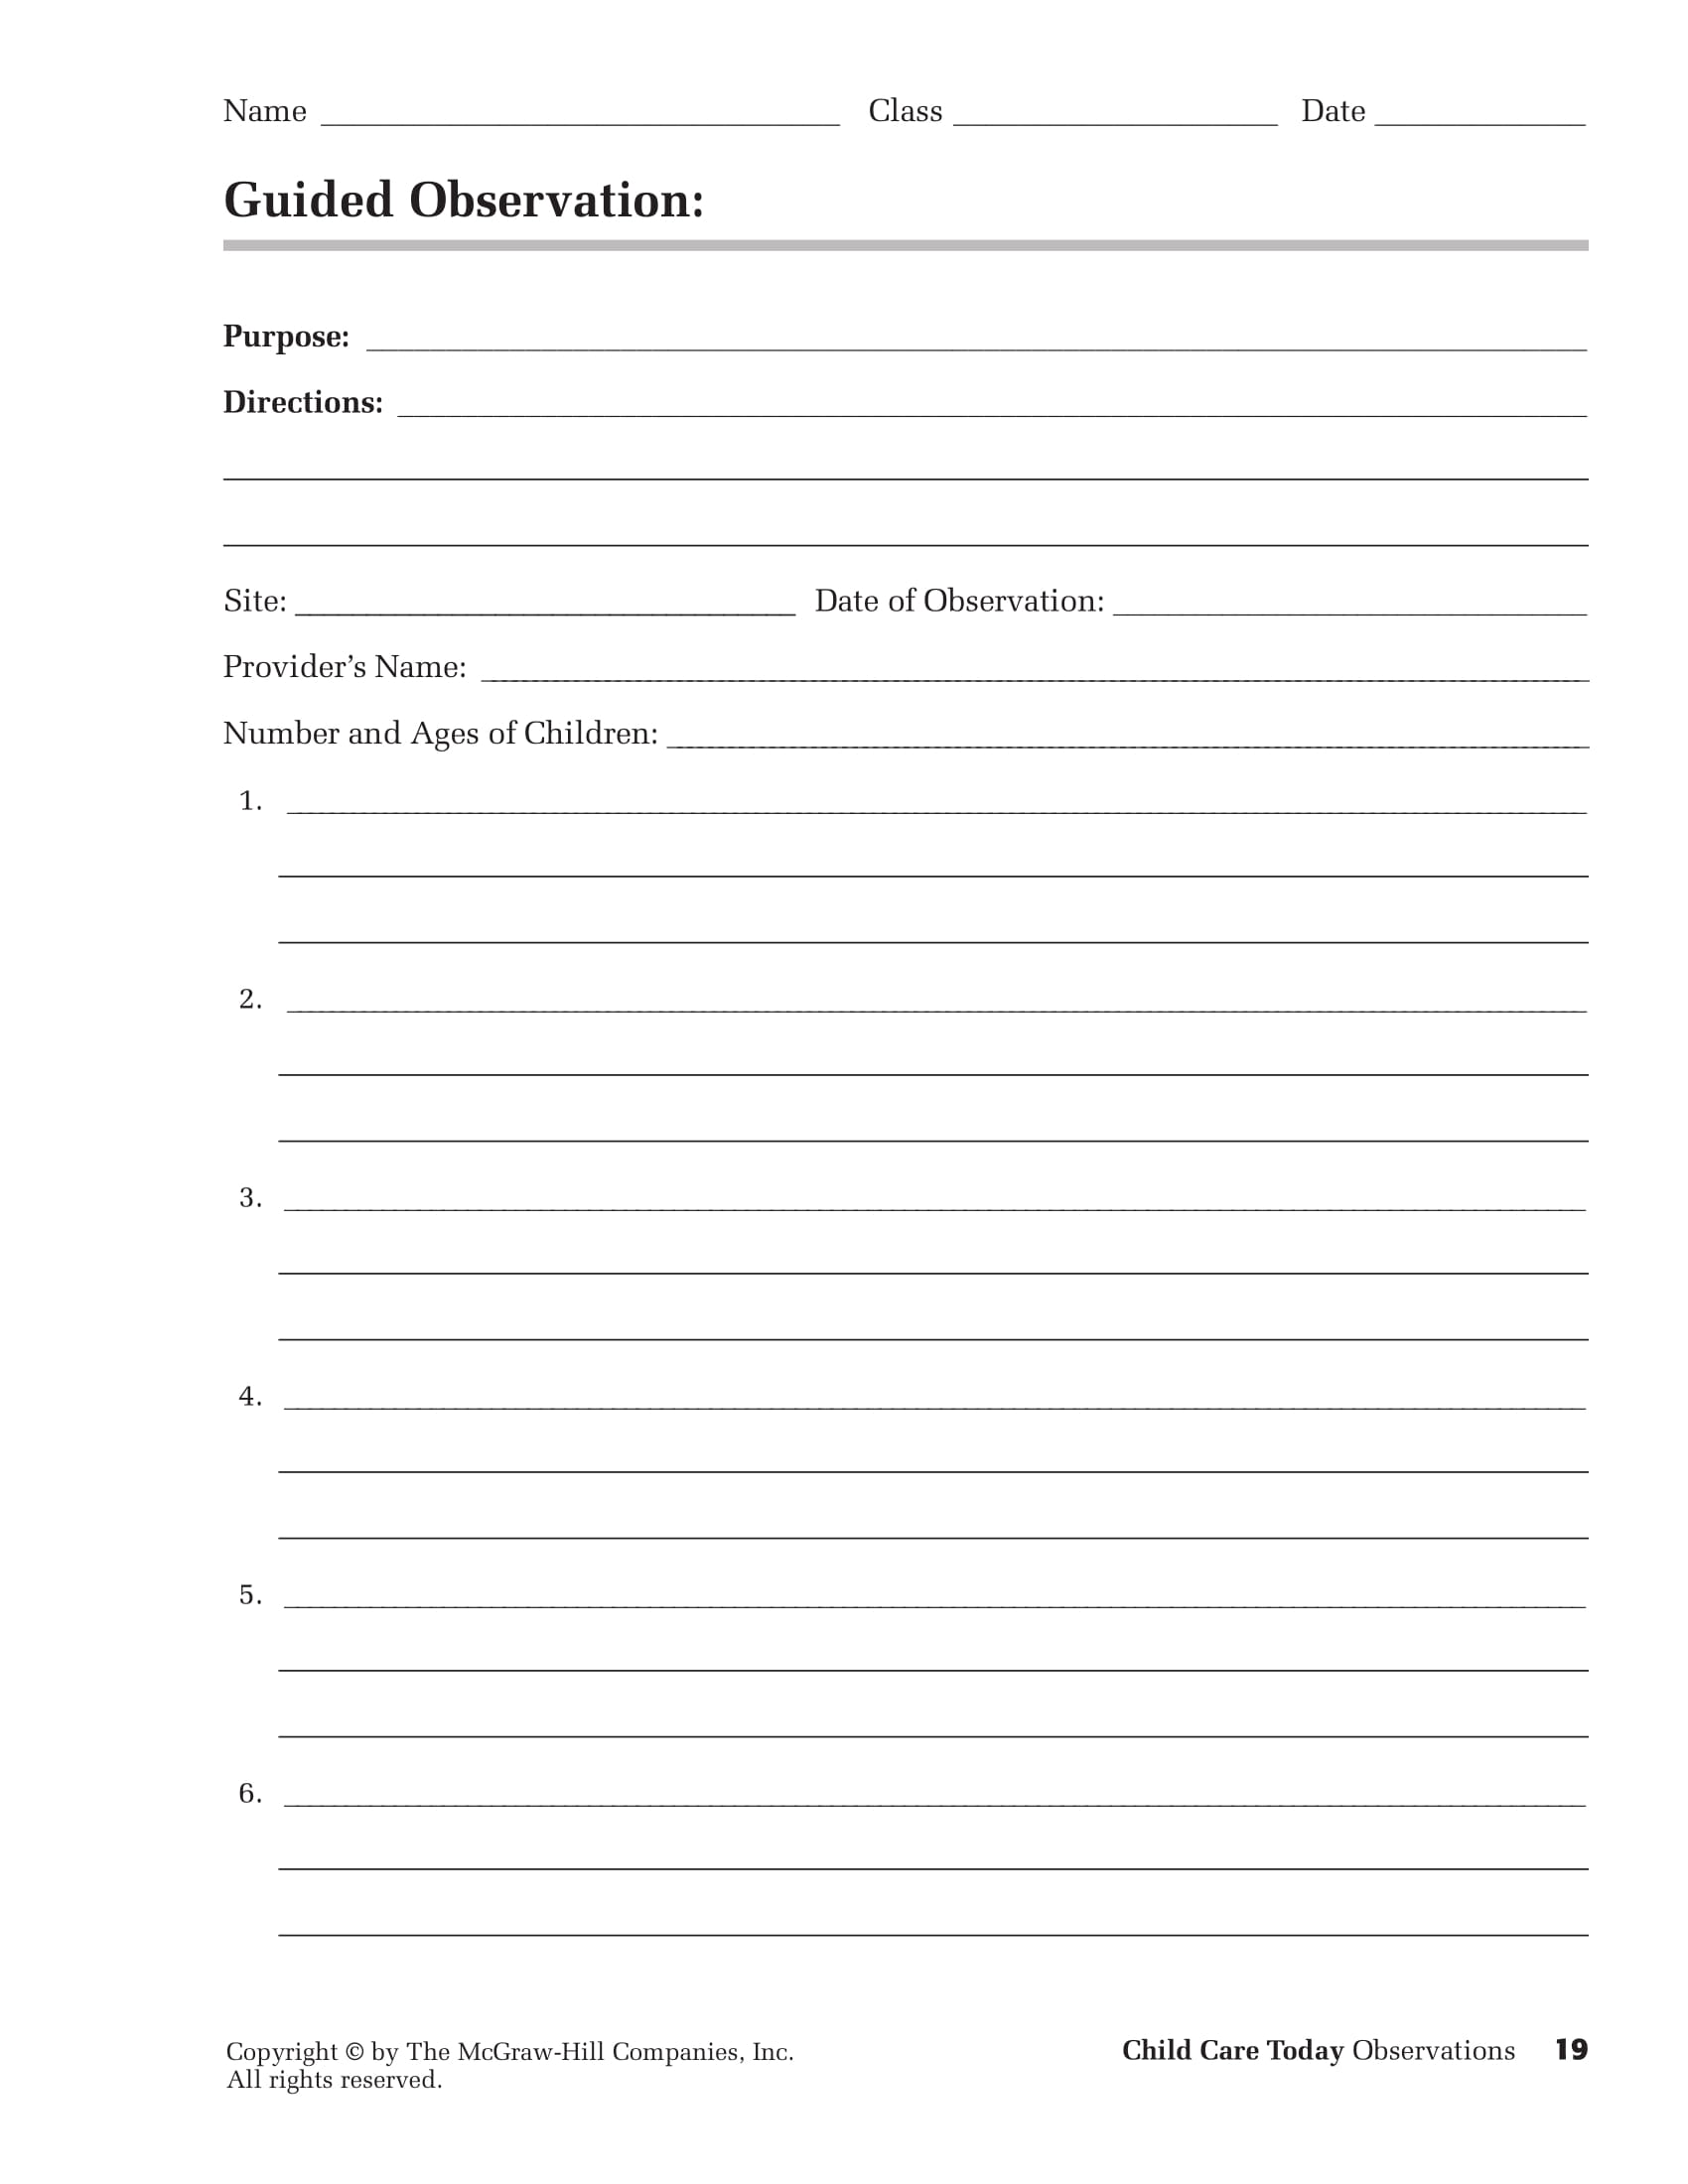 child care guided observation form 019